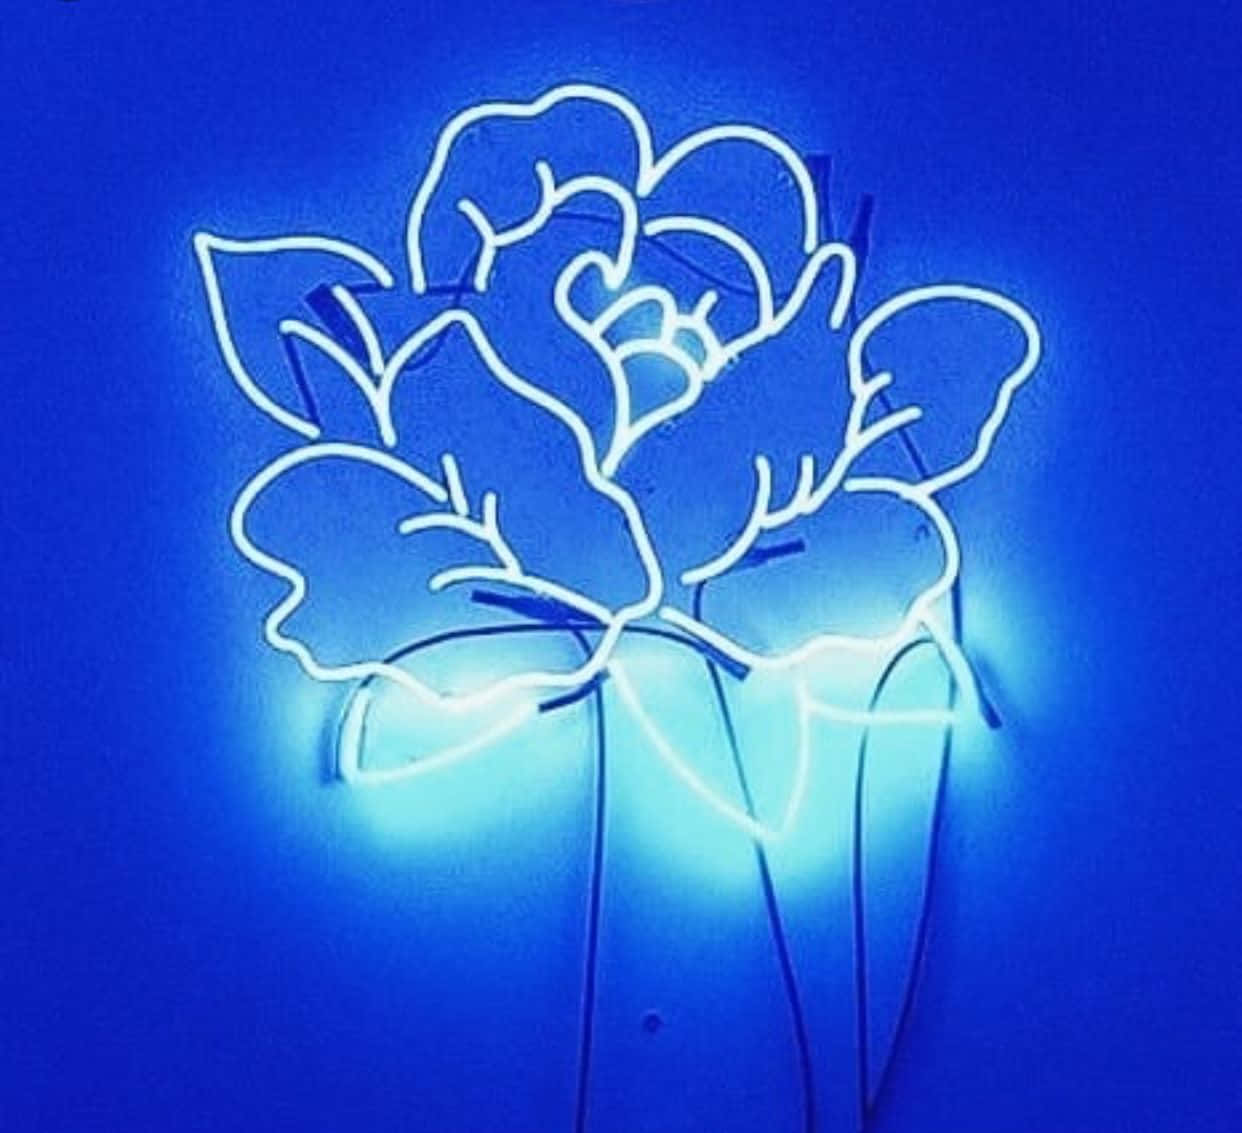 "Exploring the surreal beauty of neon blue aesthetics"